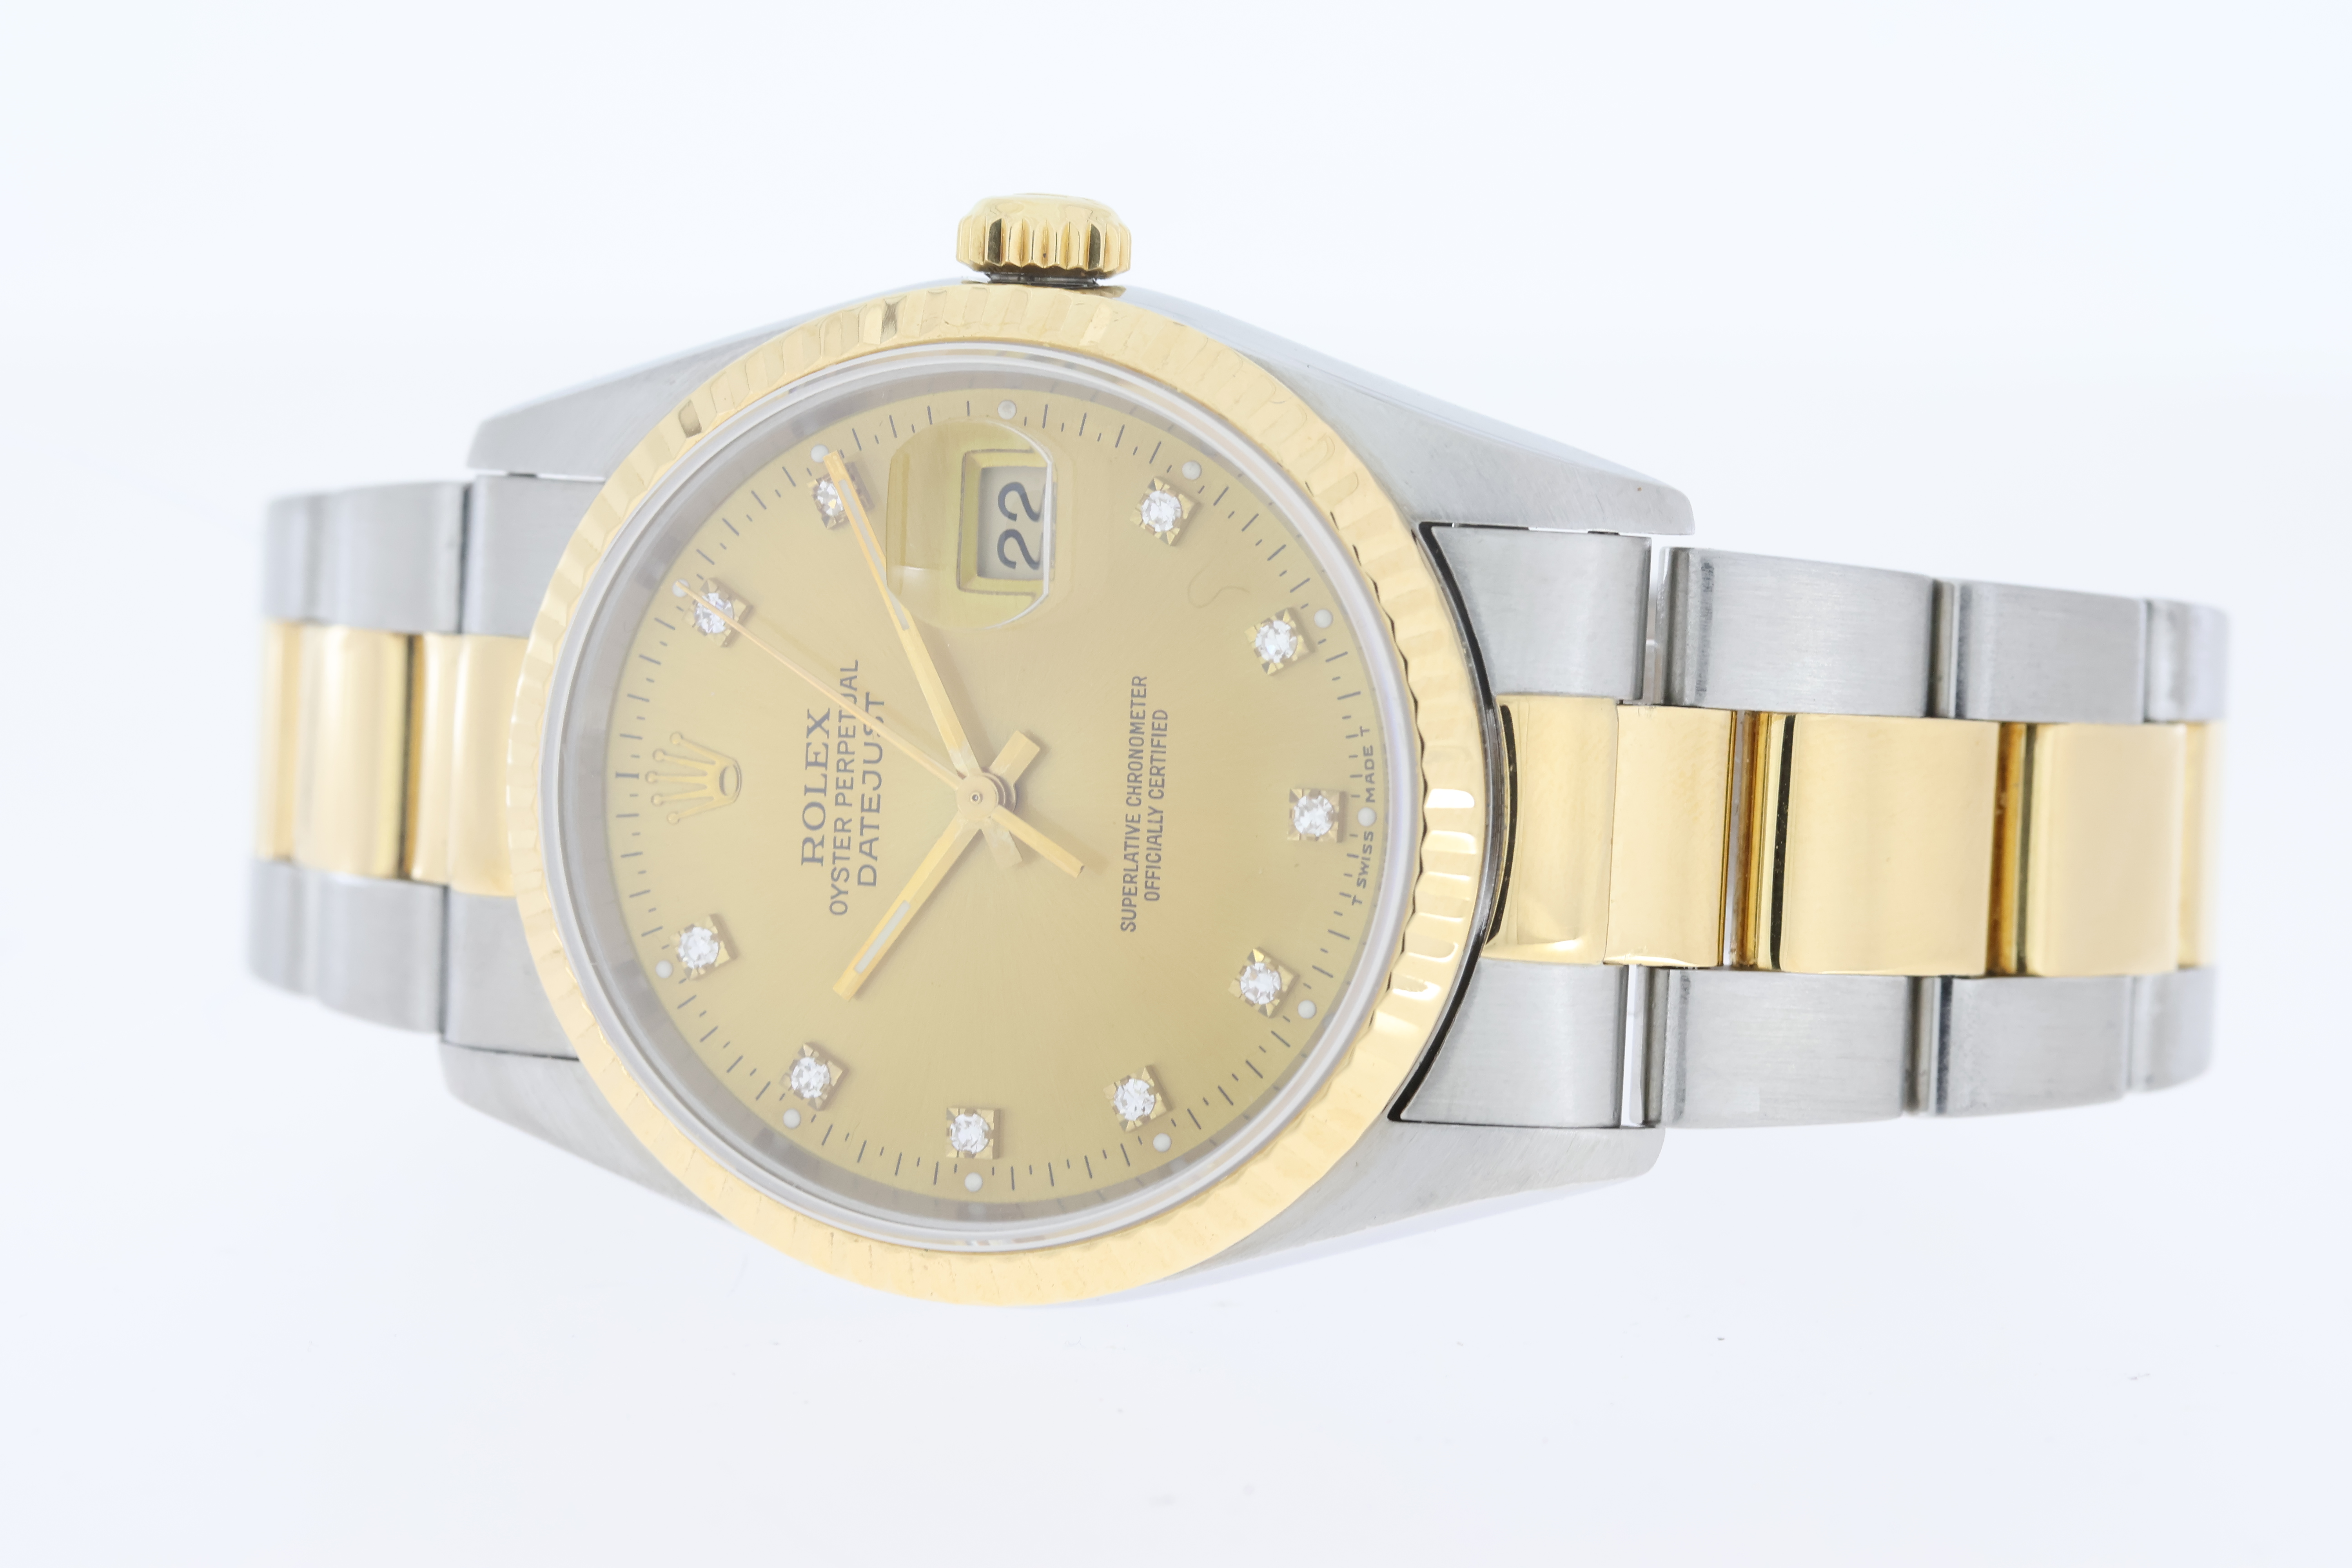 Rolex Datejust 36 Reference 16233 Box and Papers 1999 - Image 3 of 5